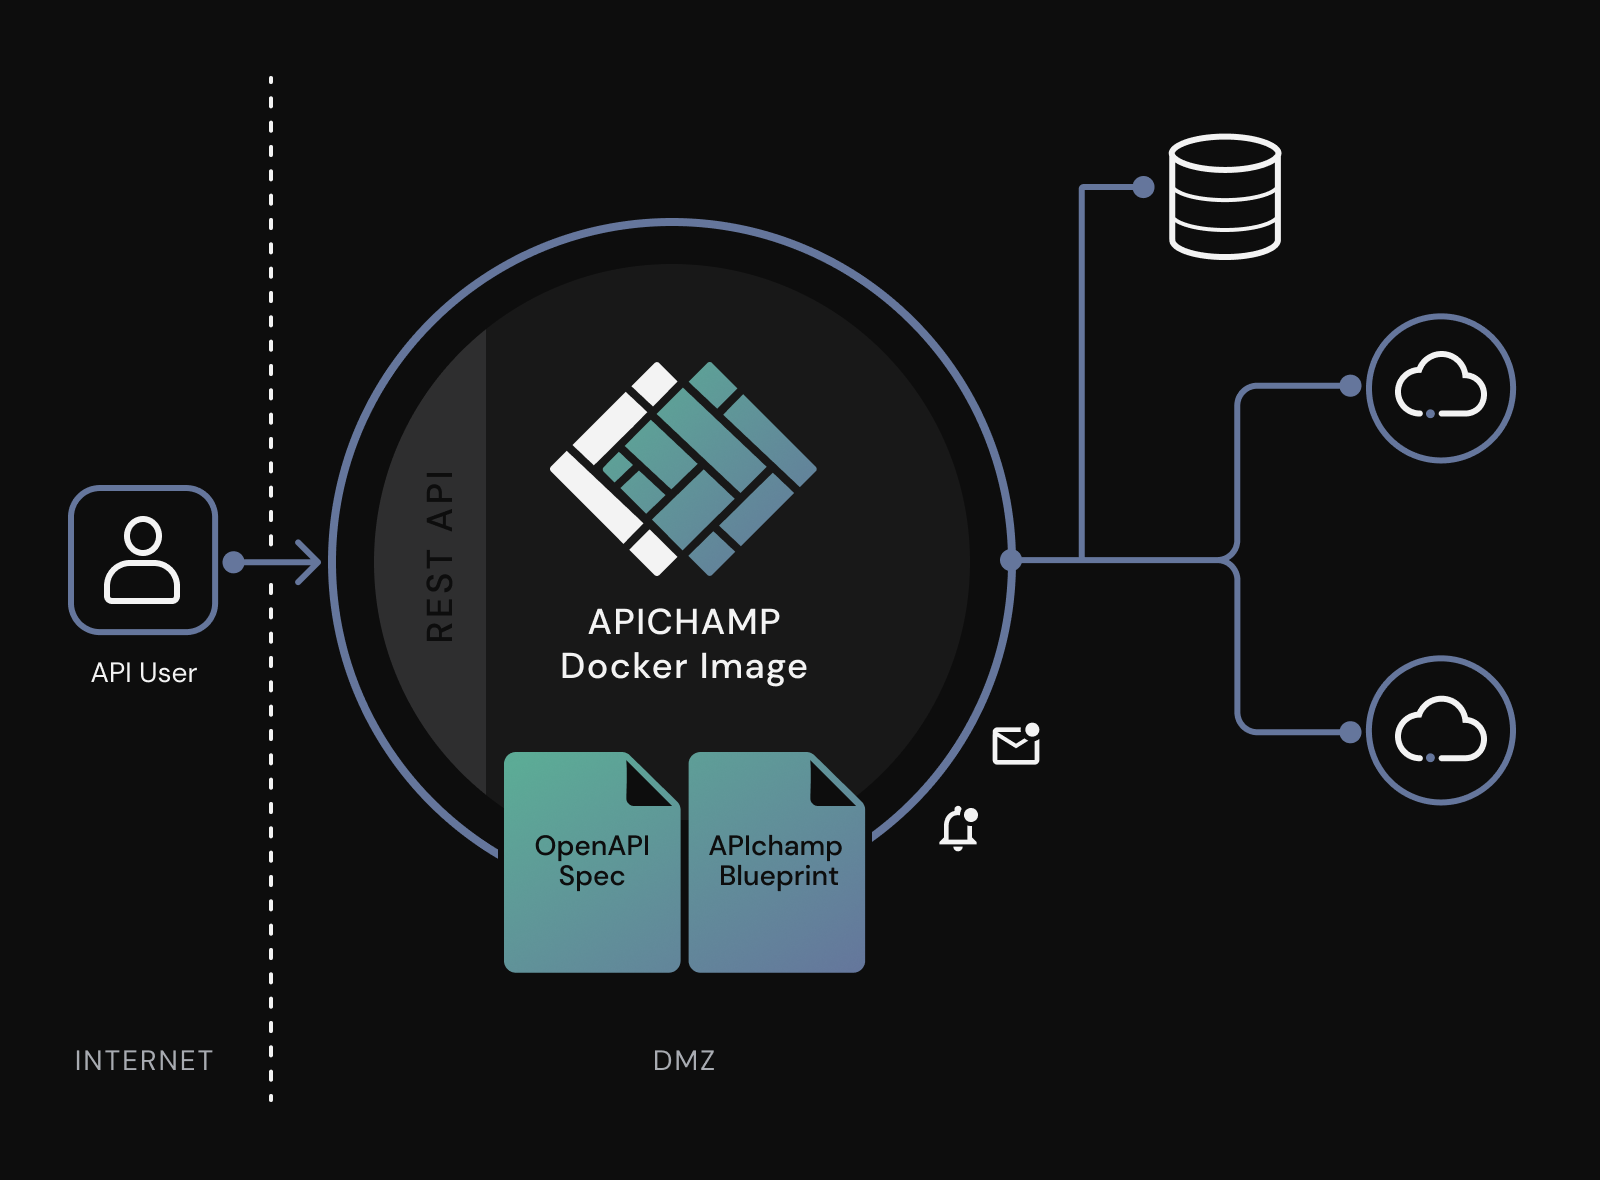 This architecture will help you to build REST-APIs faster and more efficient.